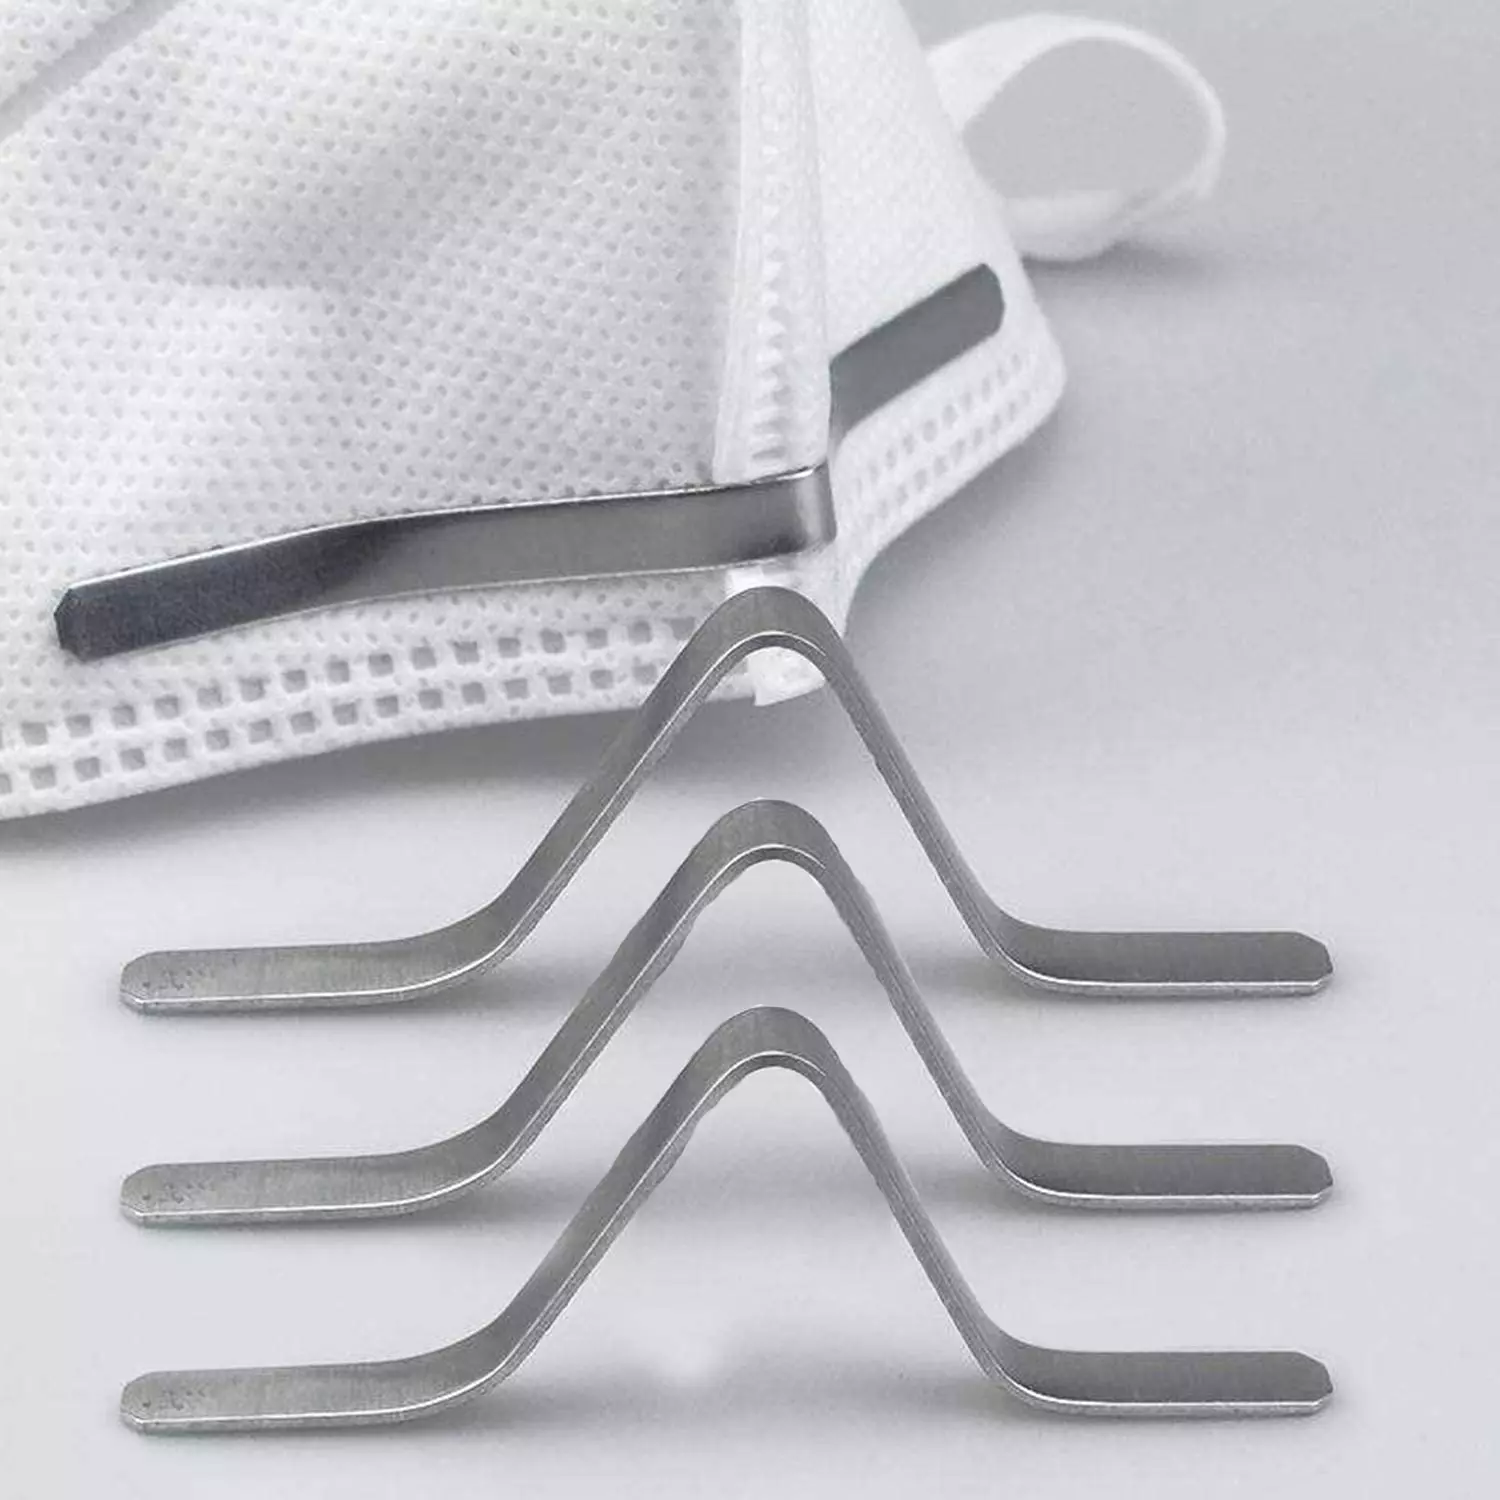 3.54 Inch Adhesive Aluminum Strips Nose Bridge Strips Aluminum Strip Straps for DIY Crafts Face Cover Making Supplies 50 